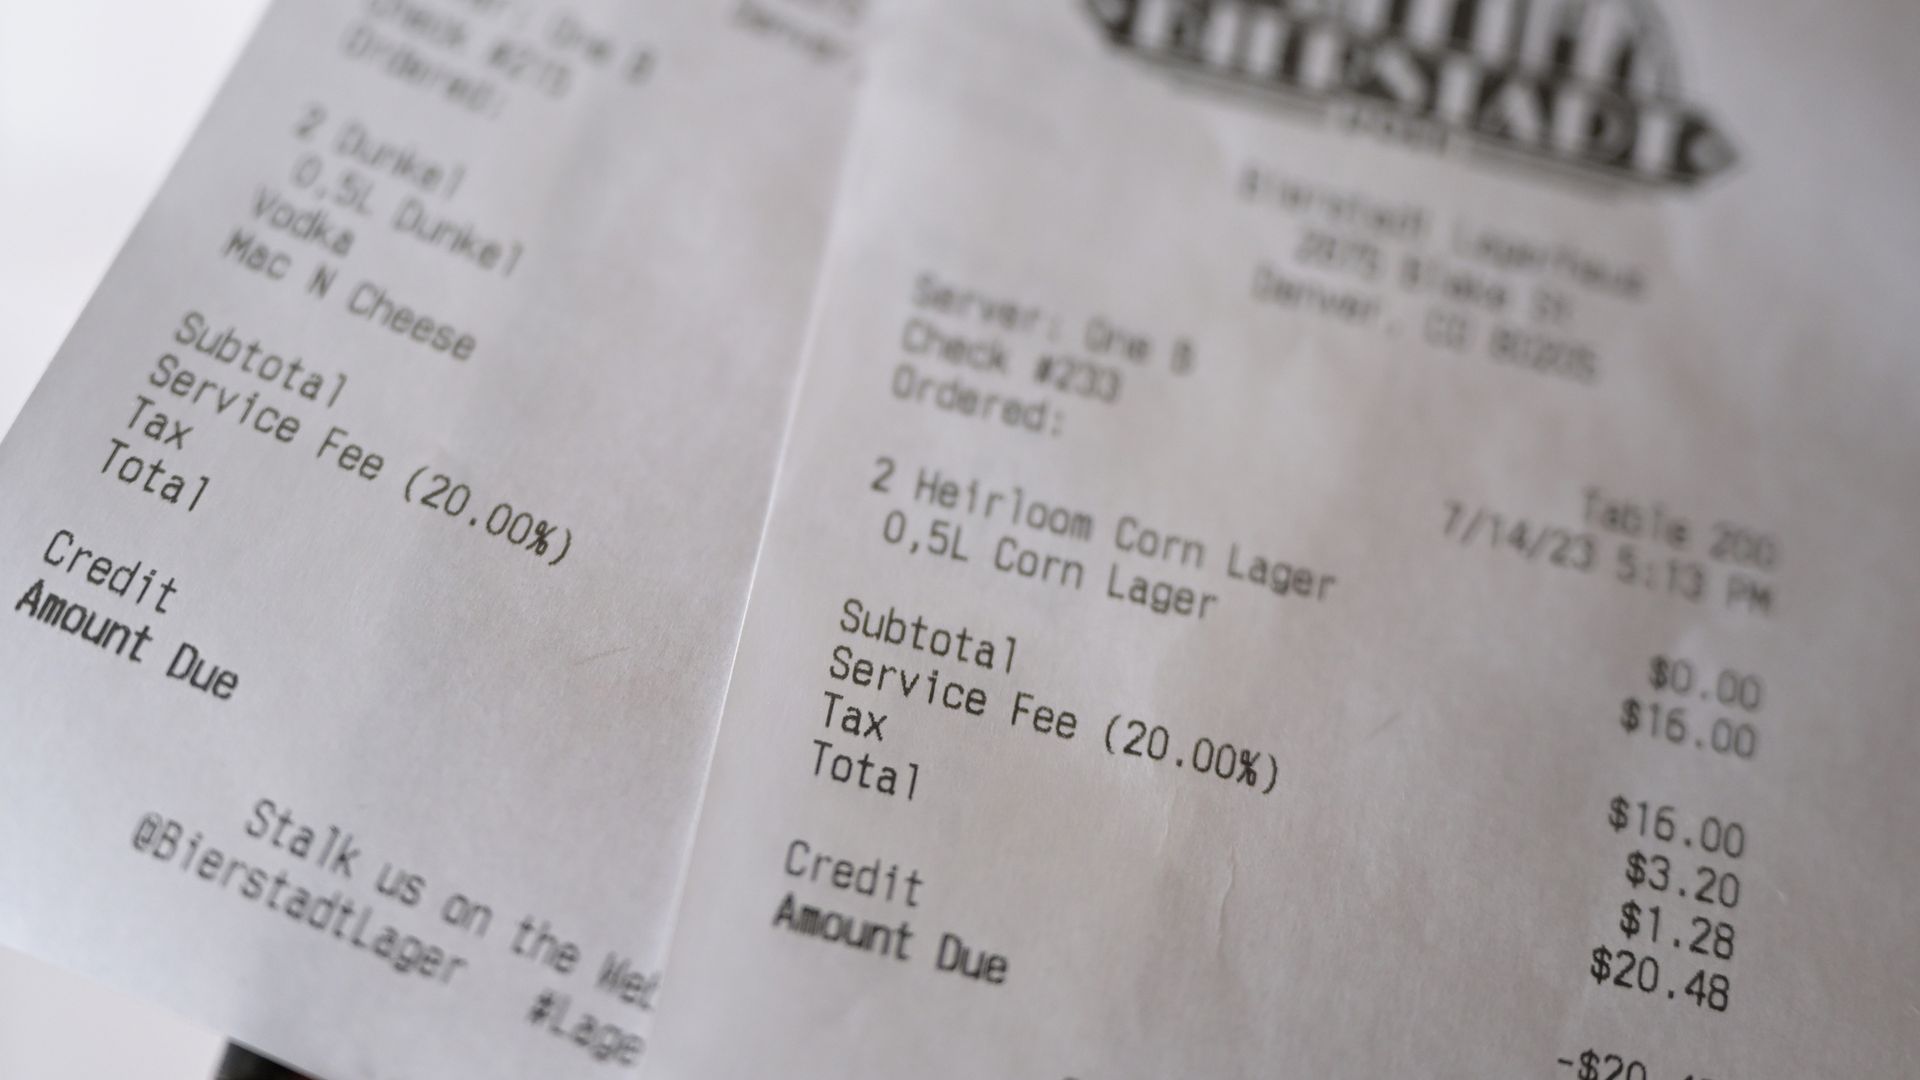 Service fees are clarified at DC restaurants by the attorney general